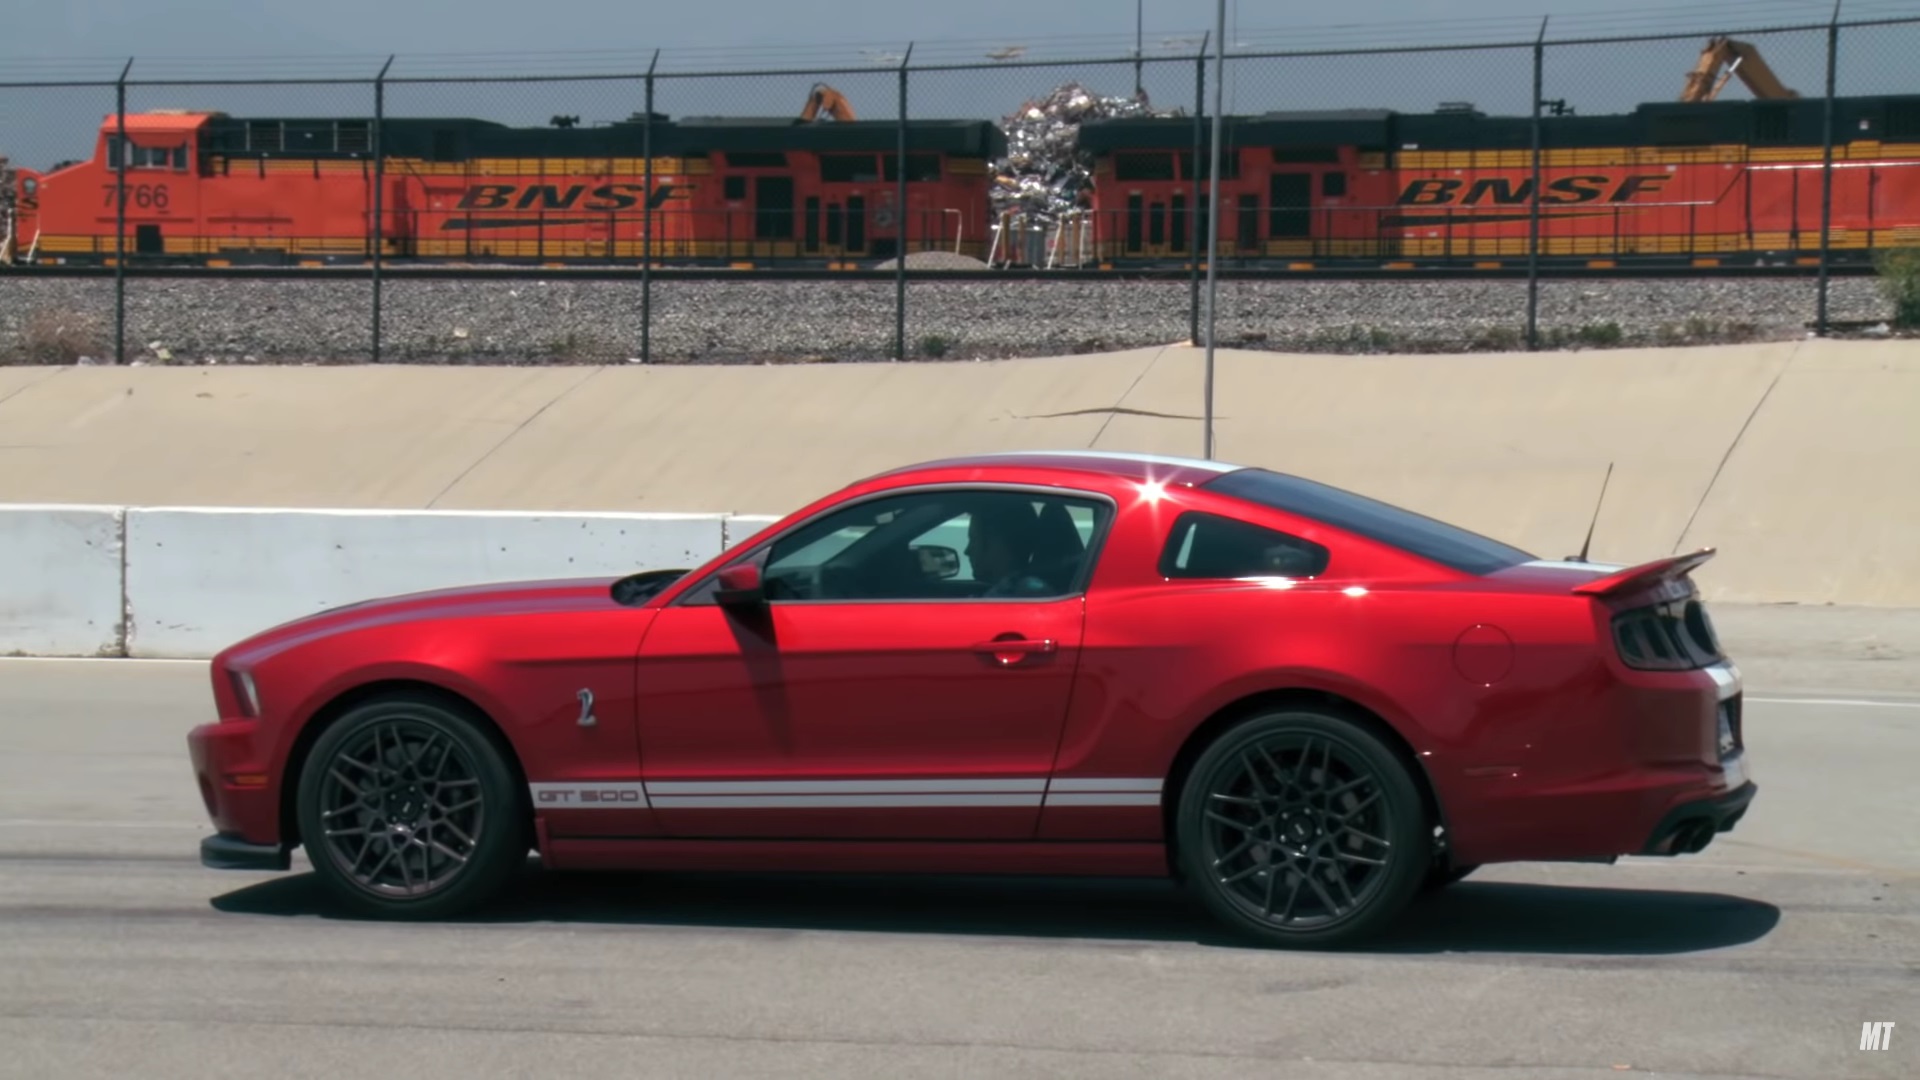 2013 Ford Mustang Shelby GT500 Gunning For 200 MPH